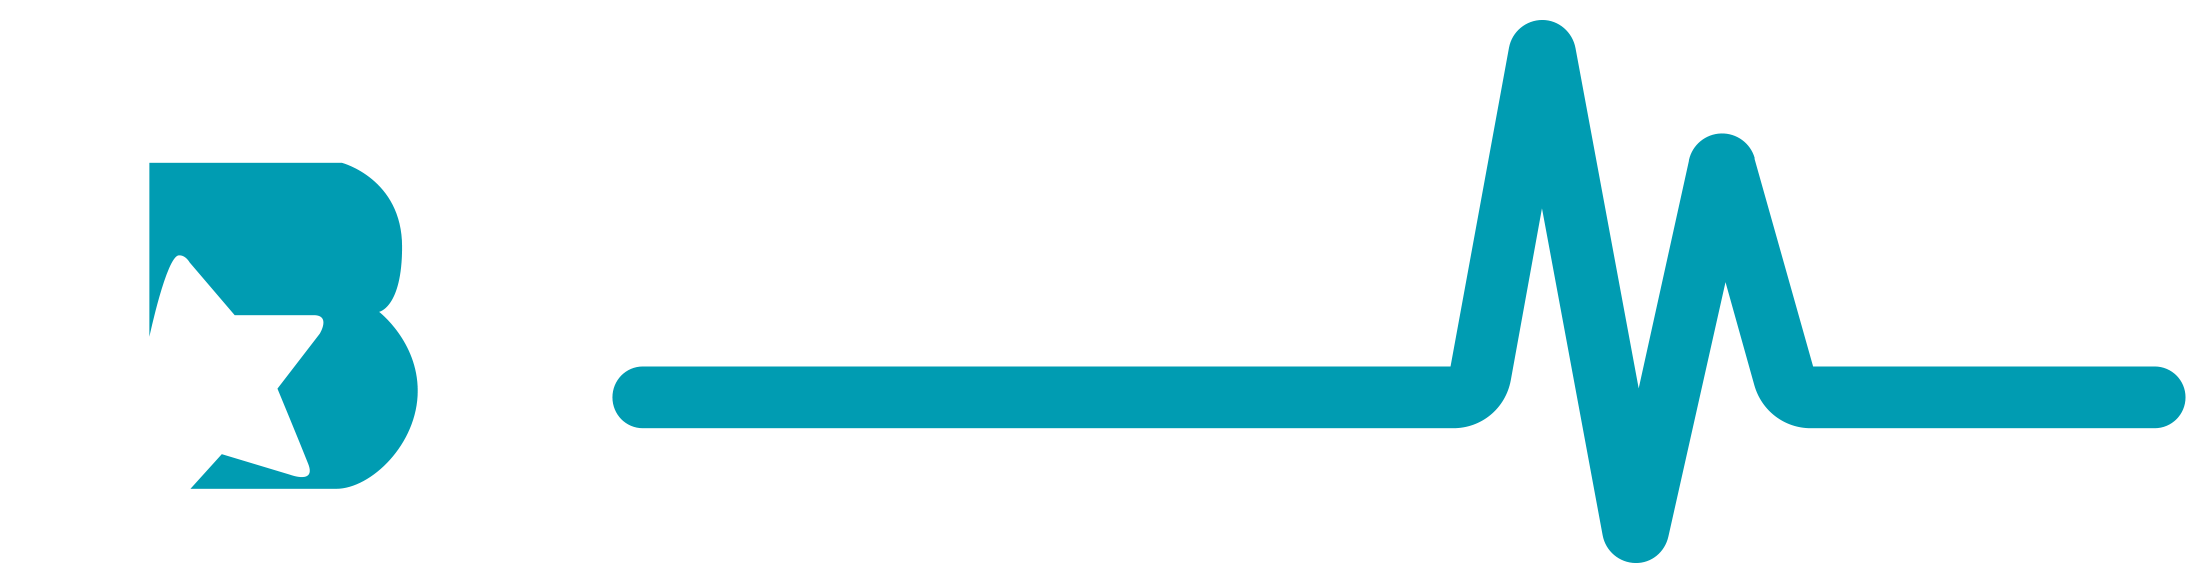 B&Reanimed Healtcare Systems